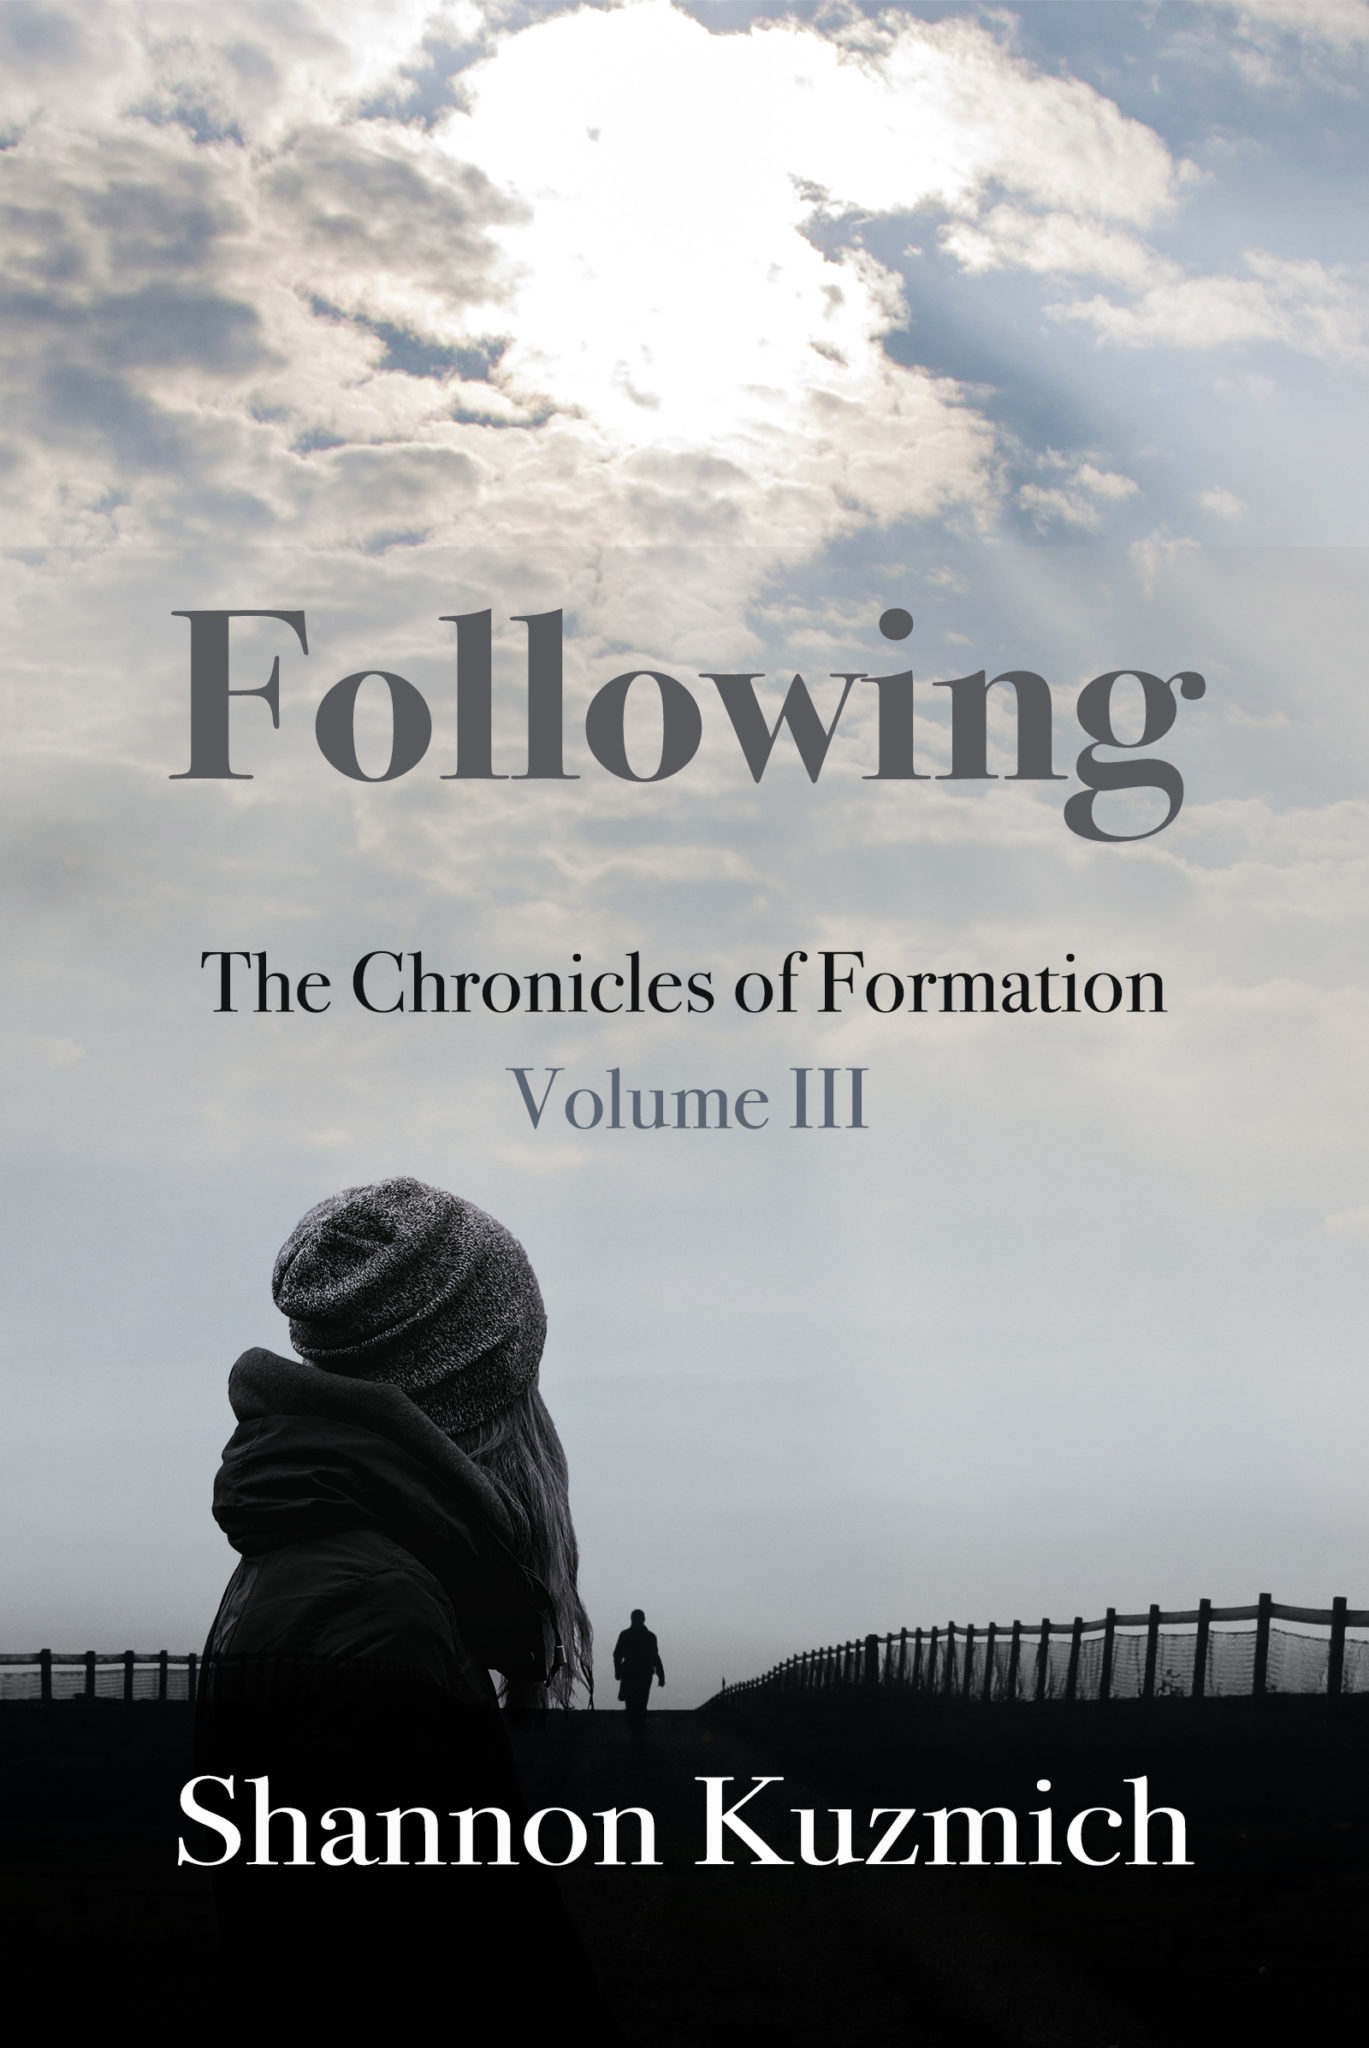 FREE: Following: The Chronicles of Formation Volume III by Shannon Kuzmich